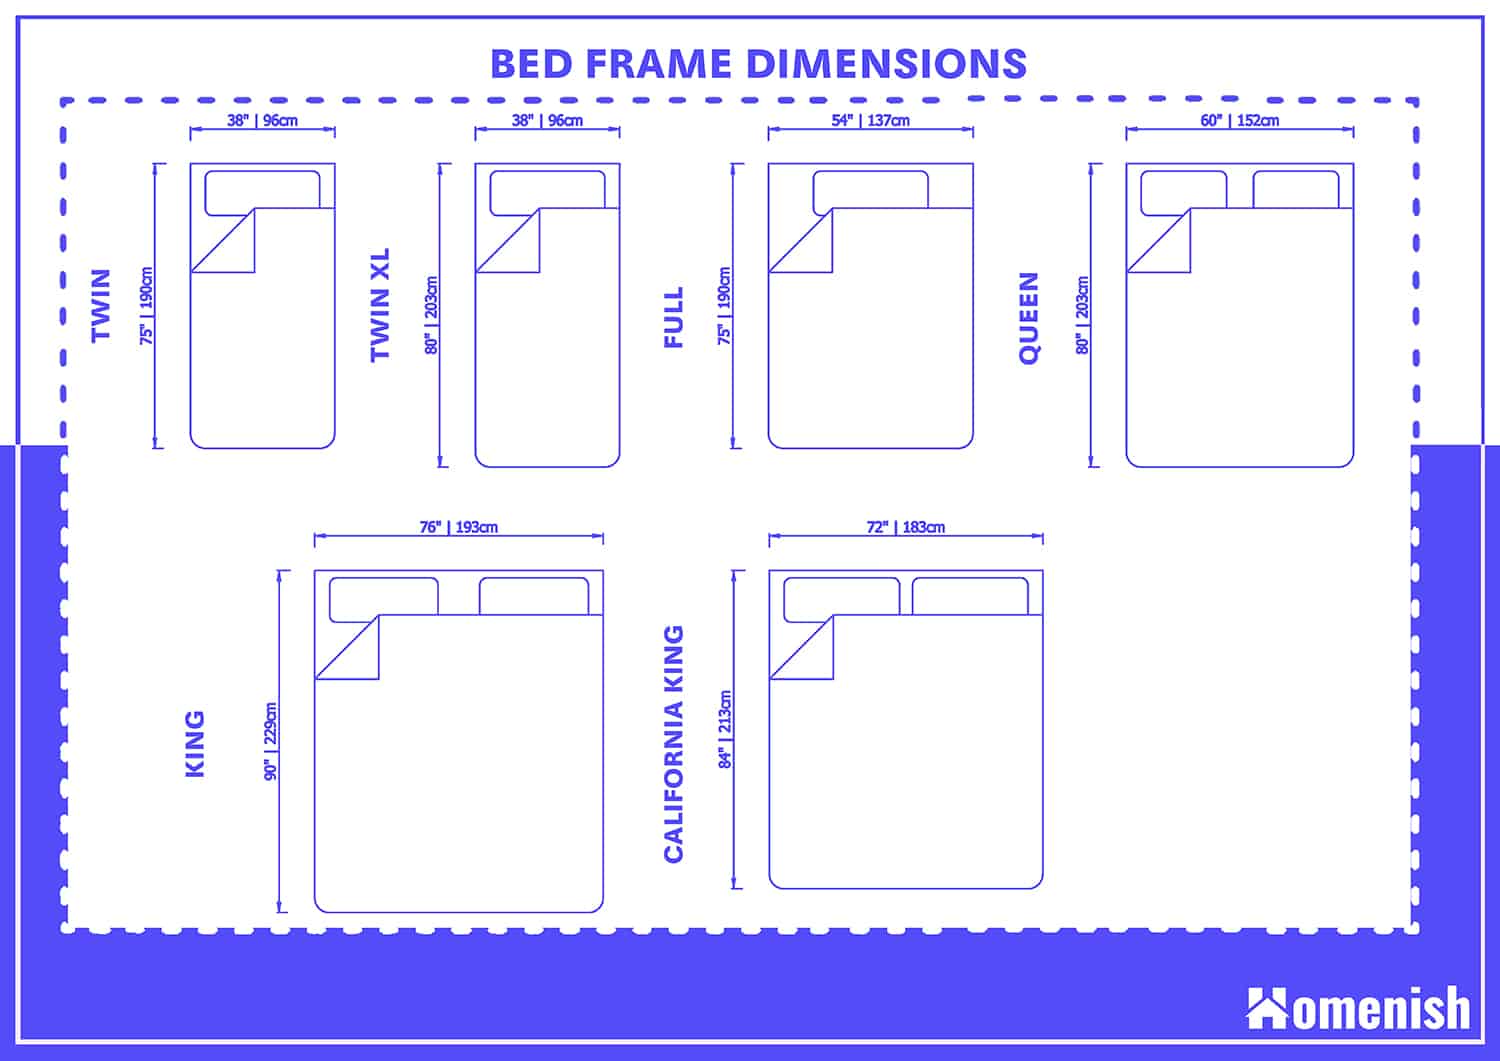 Guide To Bed Frame Dimension With, Dimensions Of A King Size Bed Frame